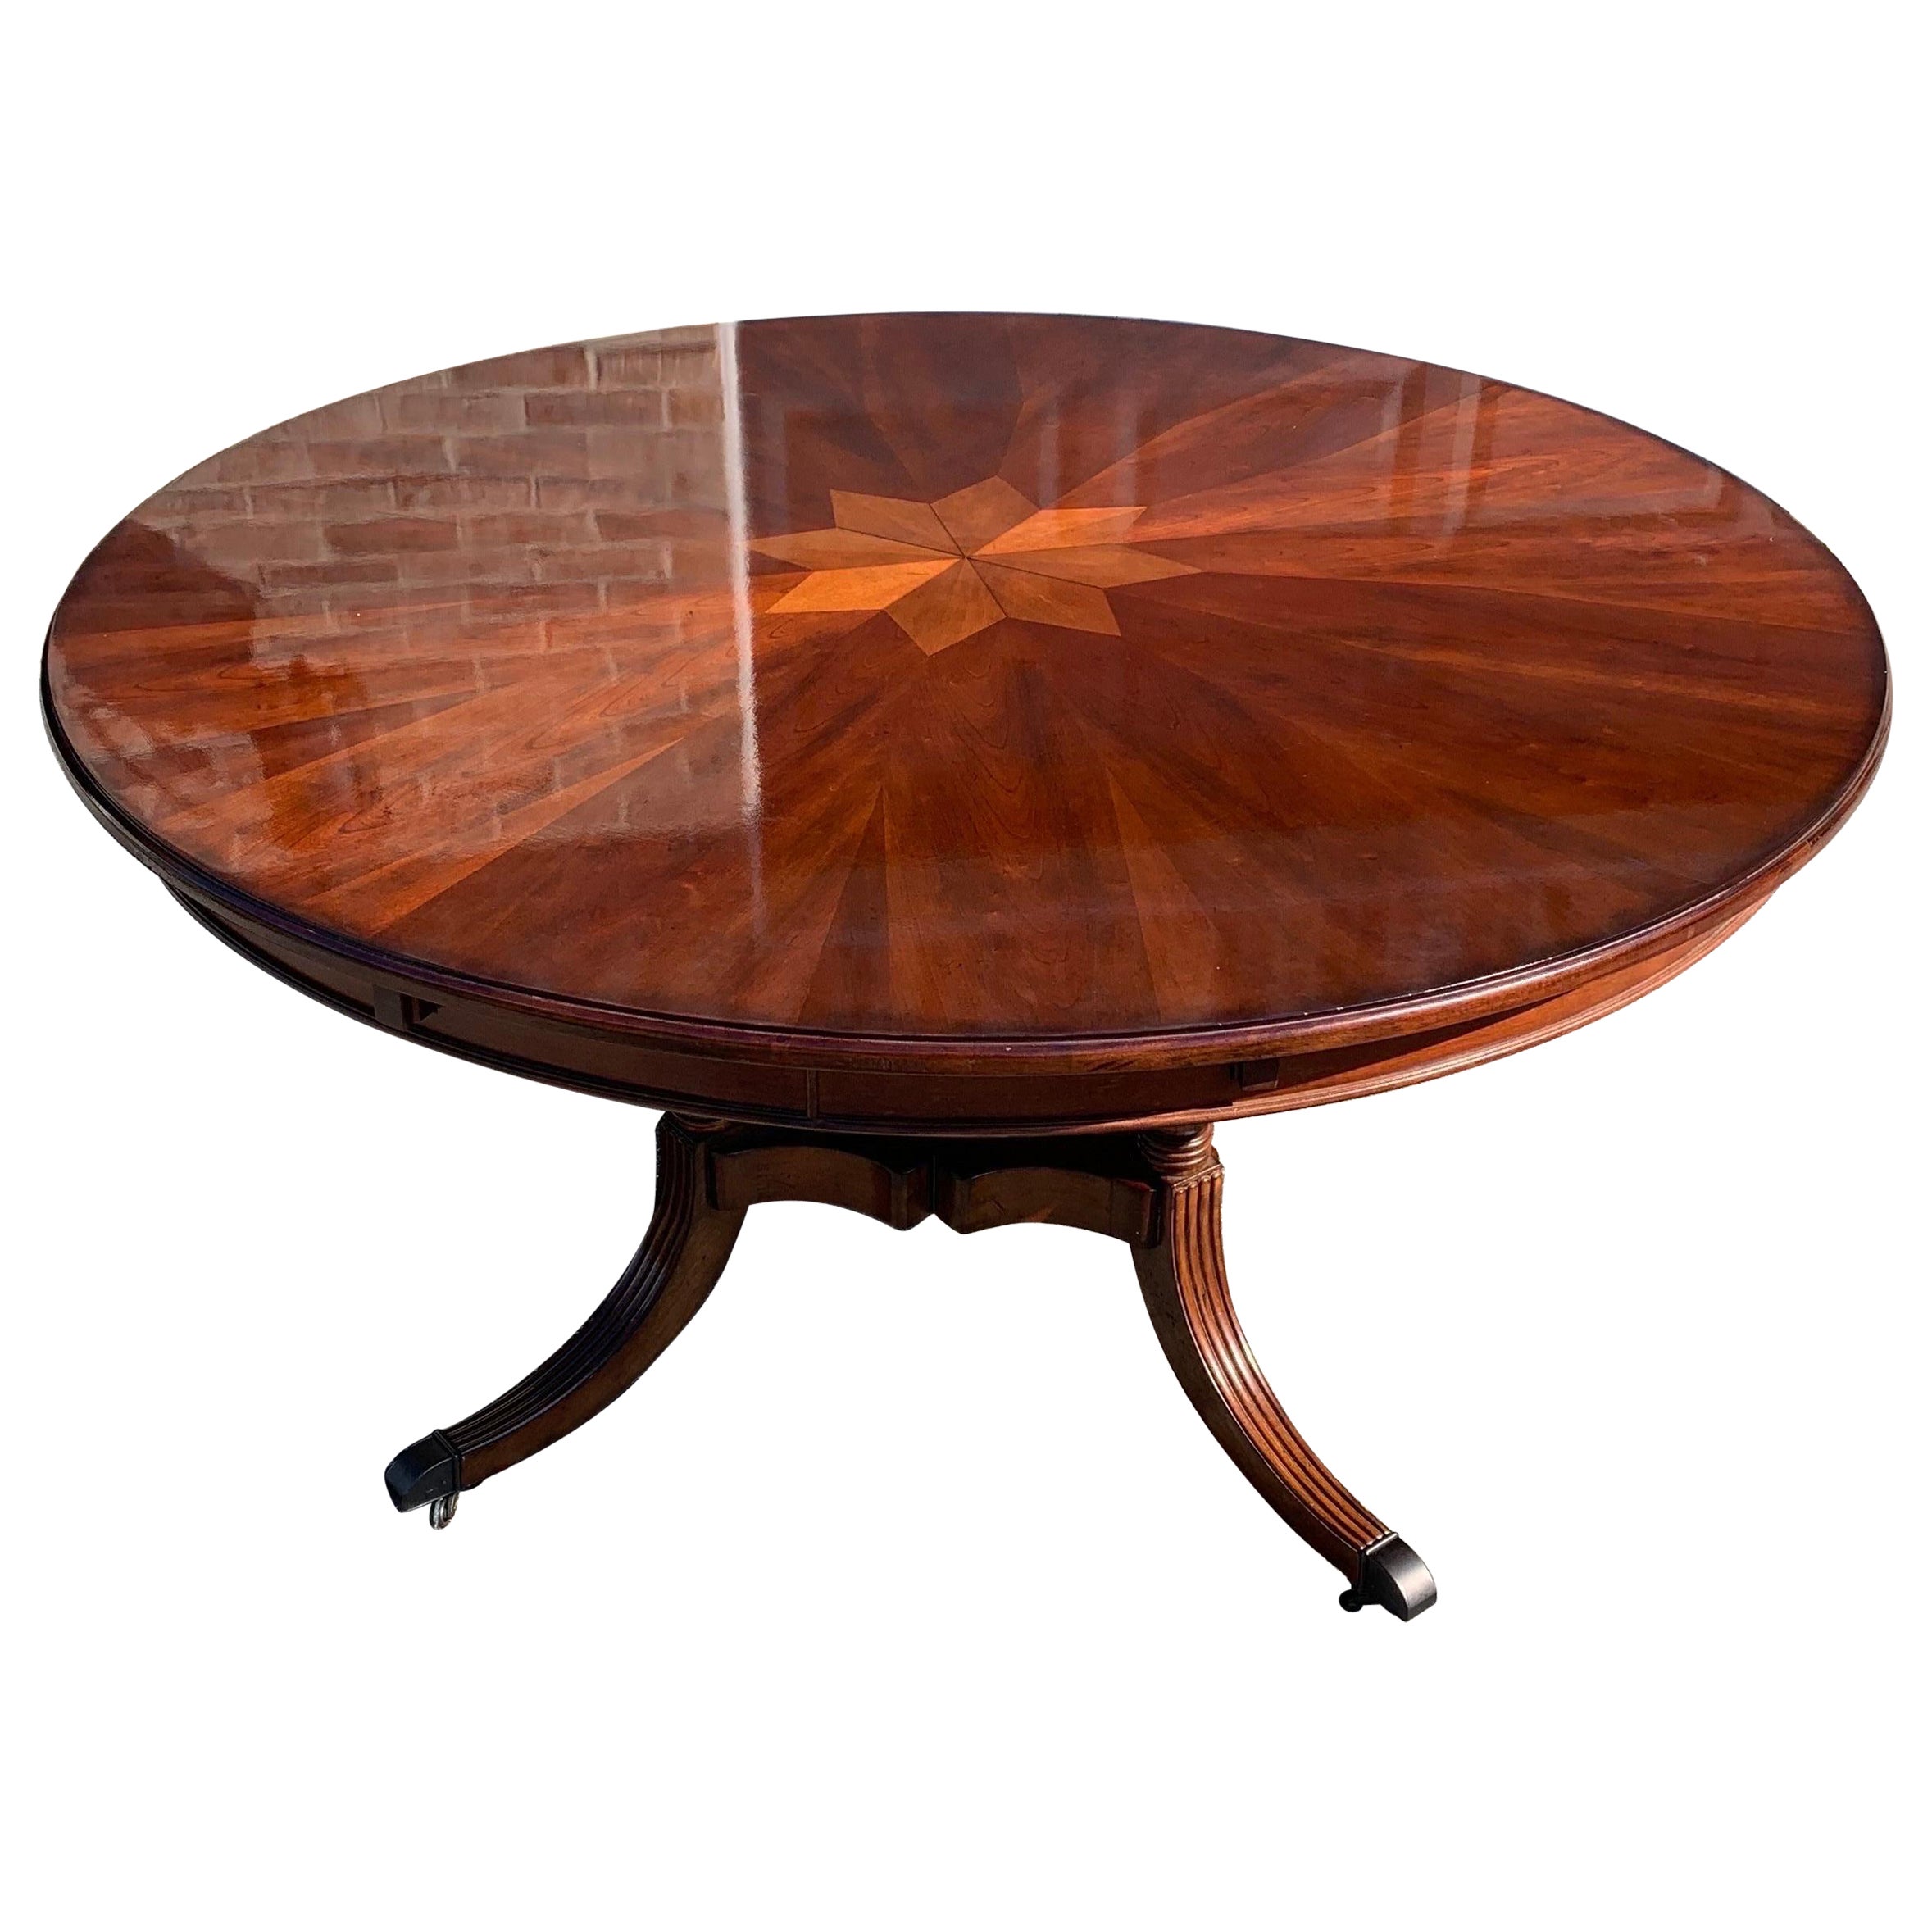 Round Mahogany Solid Wood Pedestal Dining Table with Perimeter Leaves